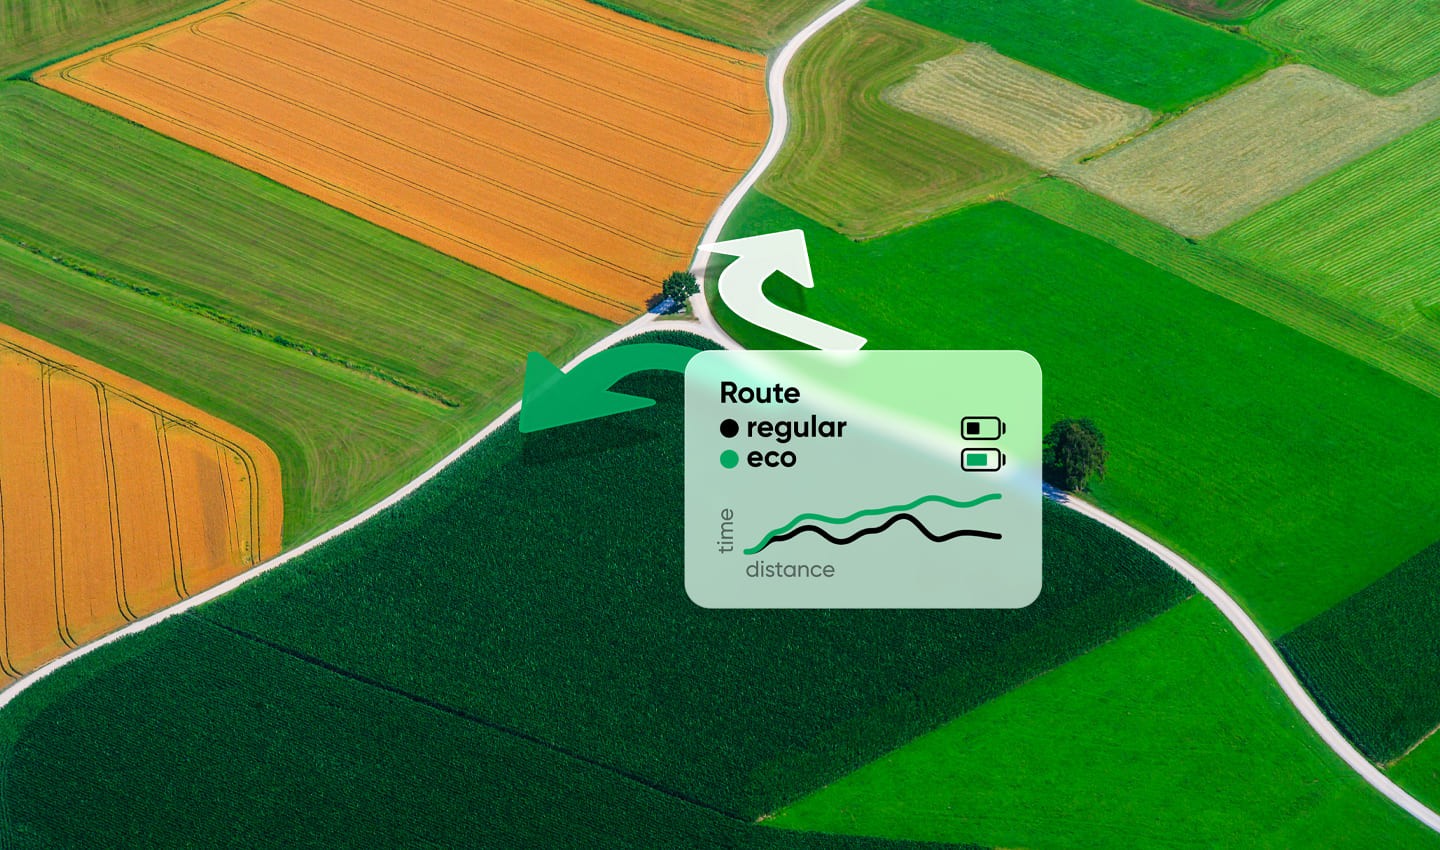 A map showing a fork in the road where one route is more economical